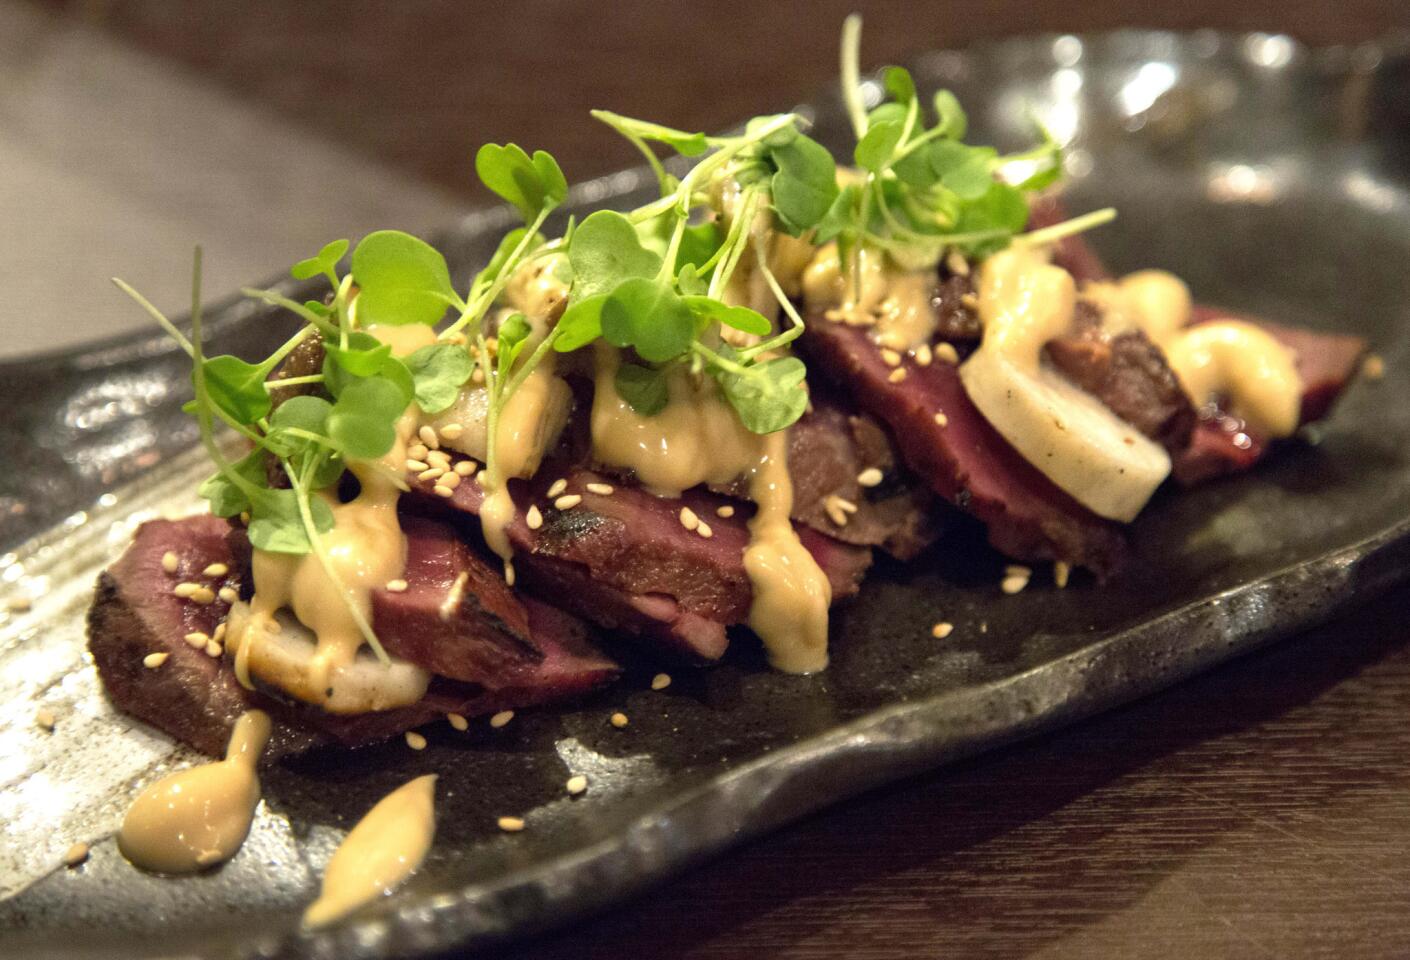 Grilled miso heart served with king oyster mushrooms and yuzi miso vinaigrette.